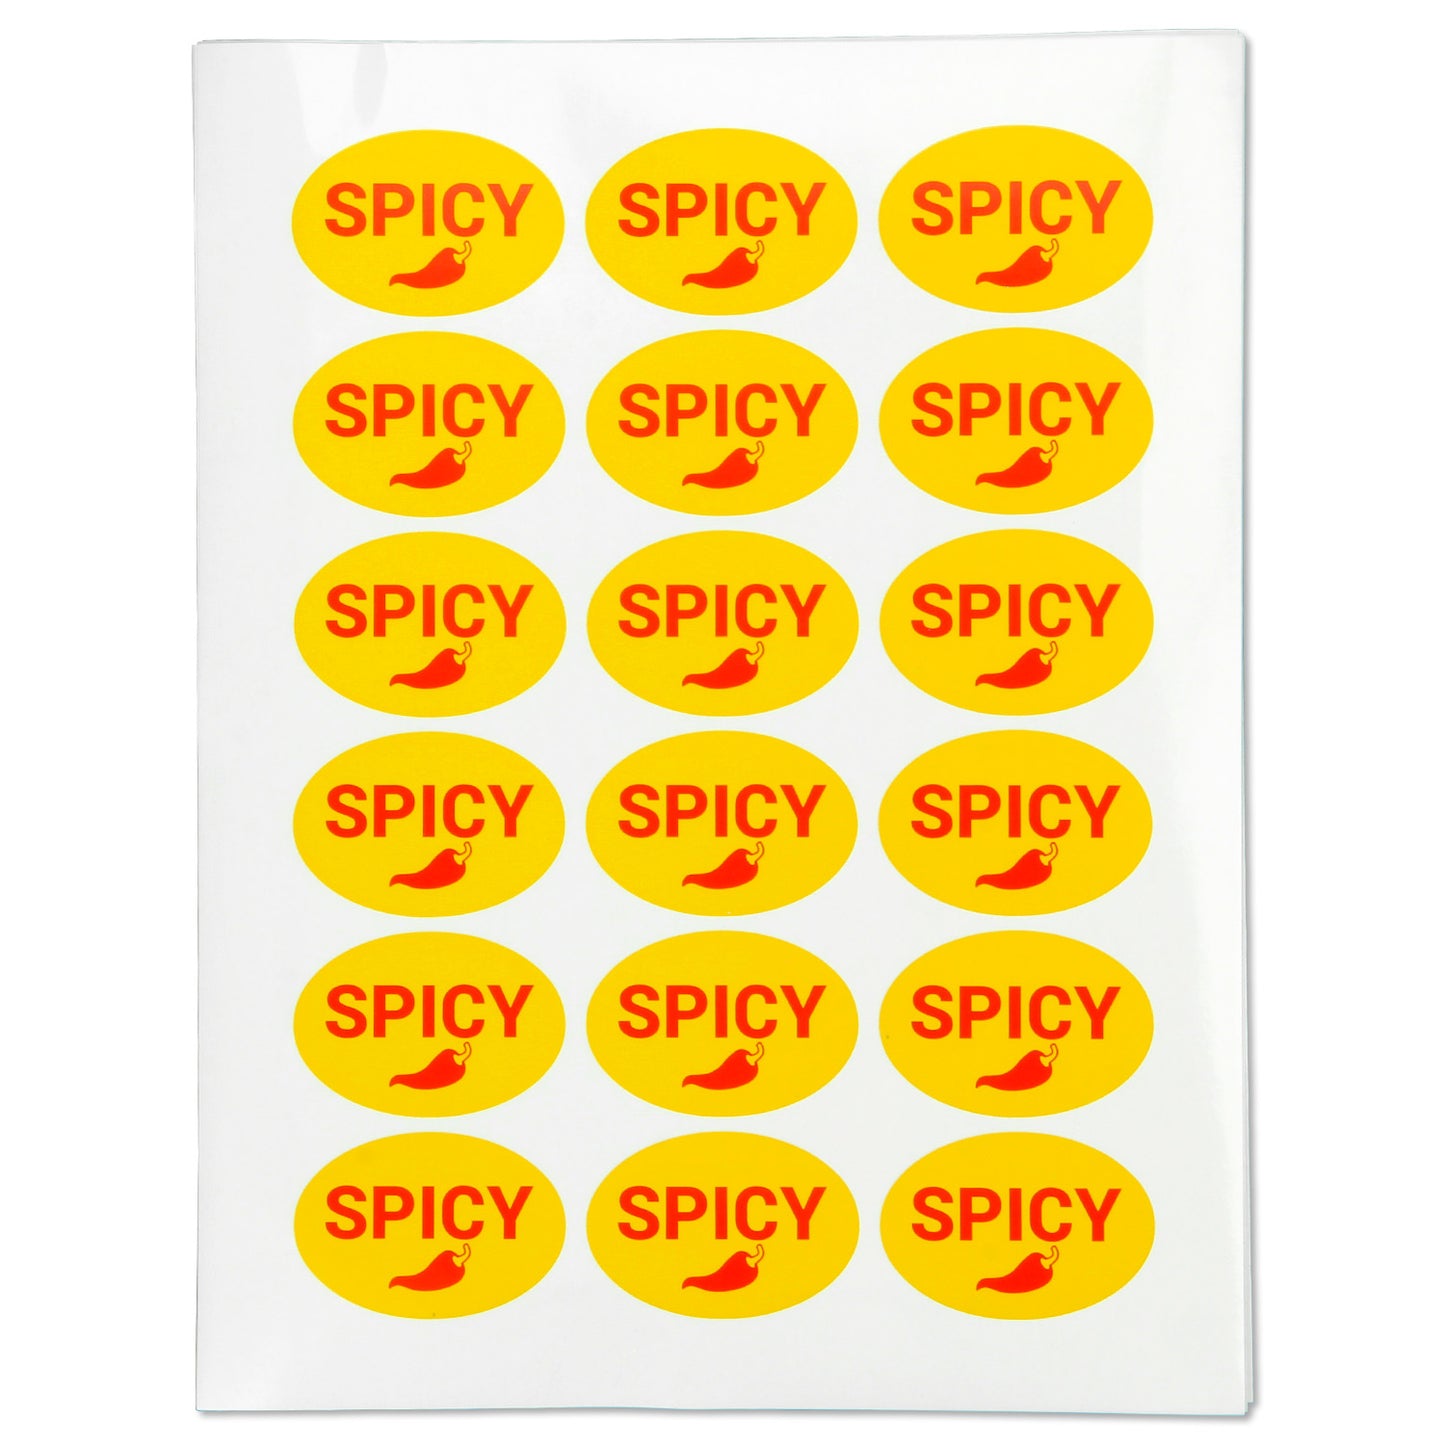 2.2 x 1 inch | Food Labeling: Spicy Stickers / Spicy Food Labels